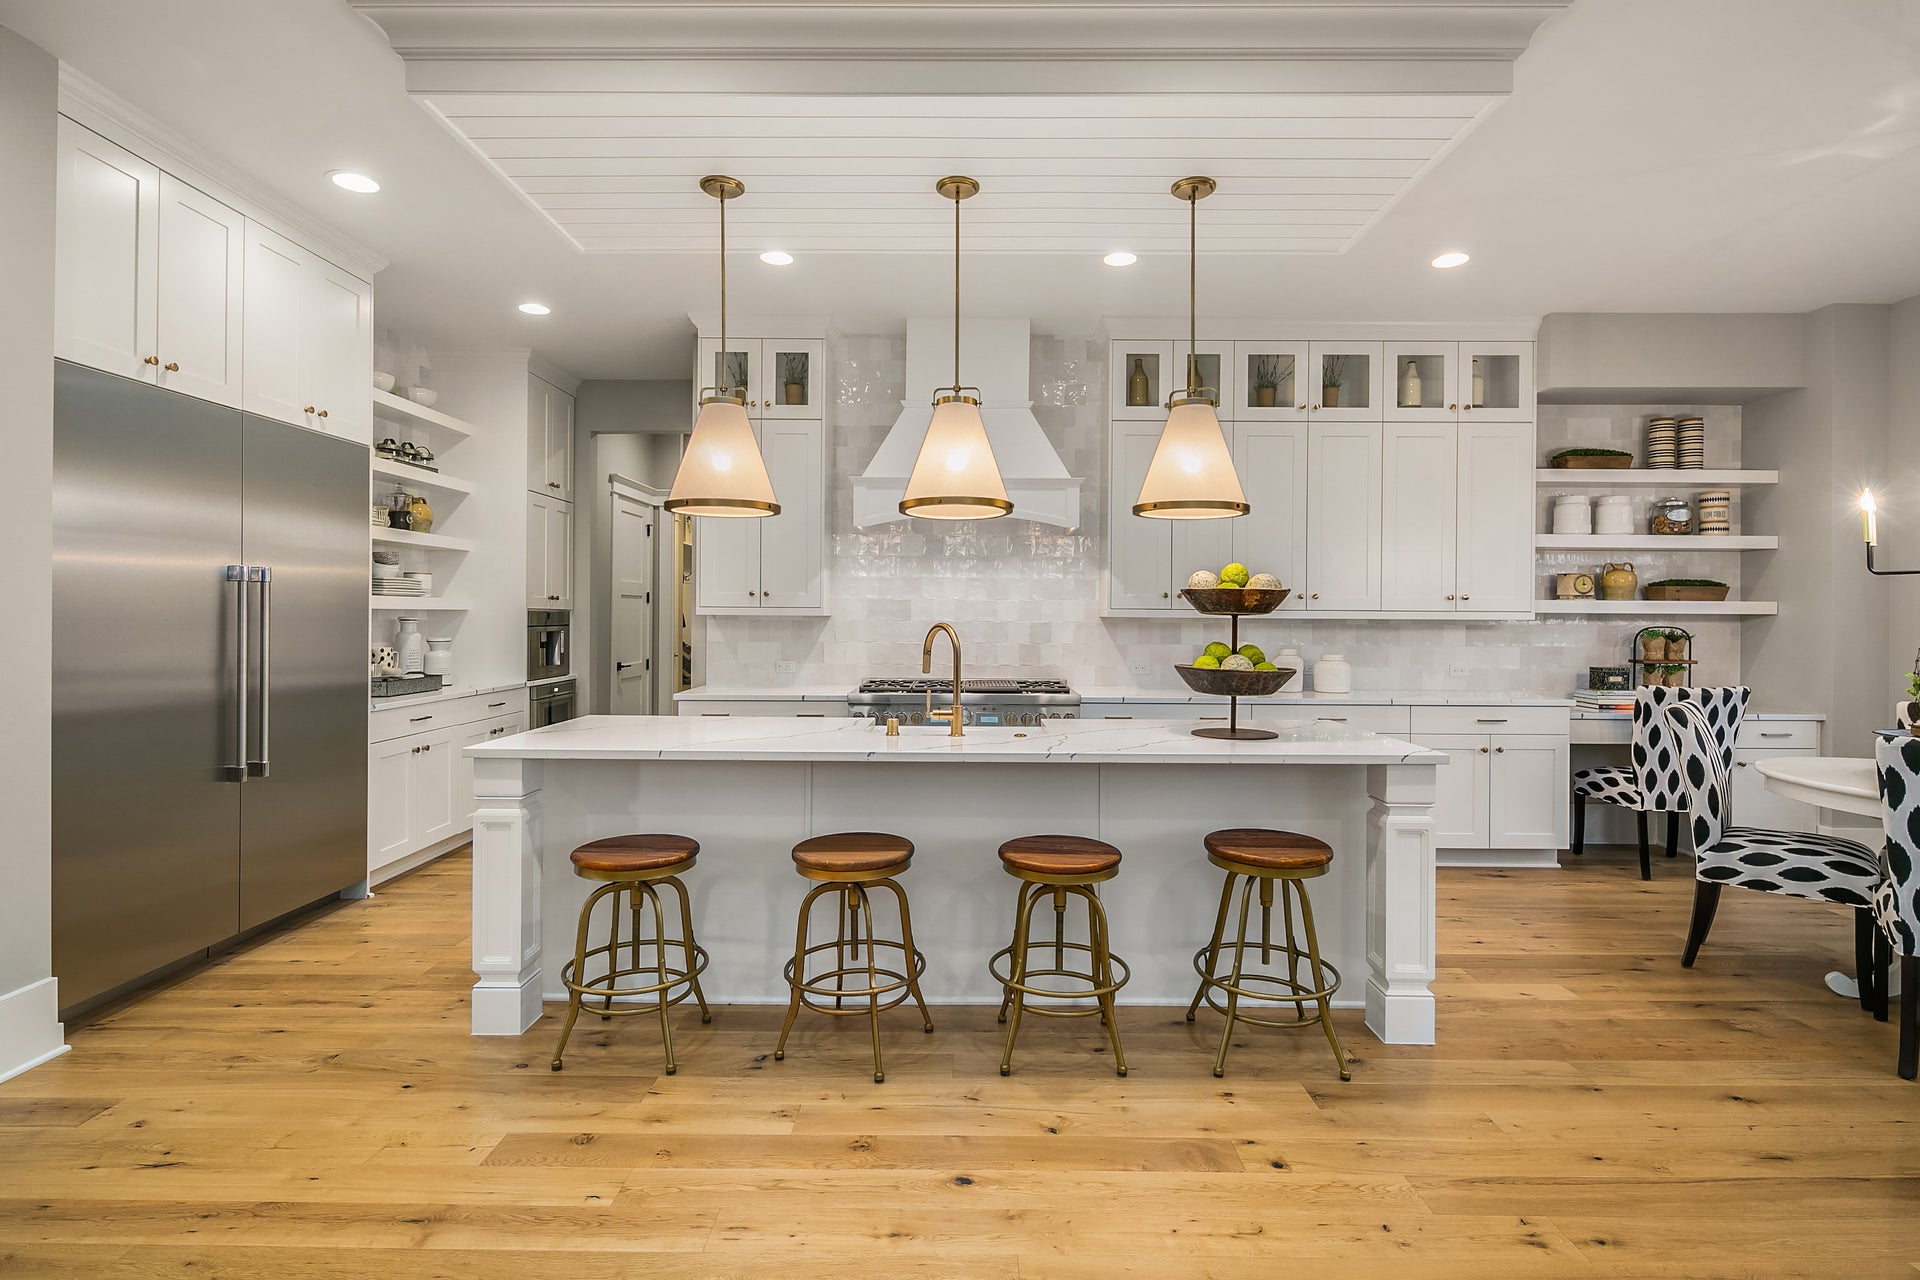 Large white kitchen with bar seating, induestrial sized fridge and gold finishes. Kitchen features an oversied island, work space, floor to ceiling white cabinets and stone countertops.